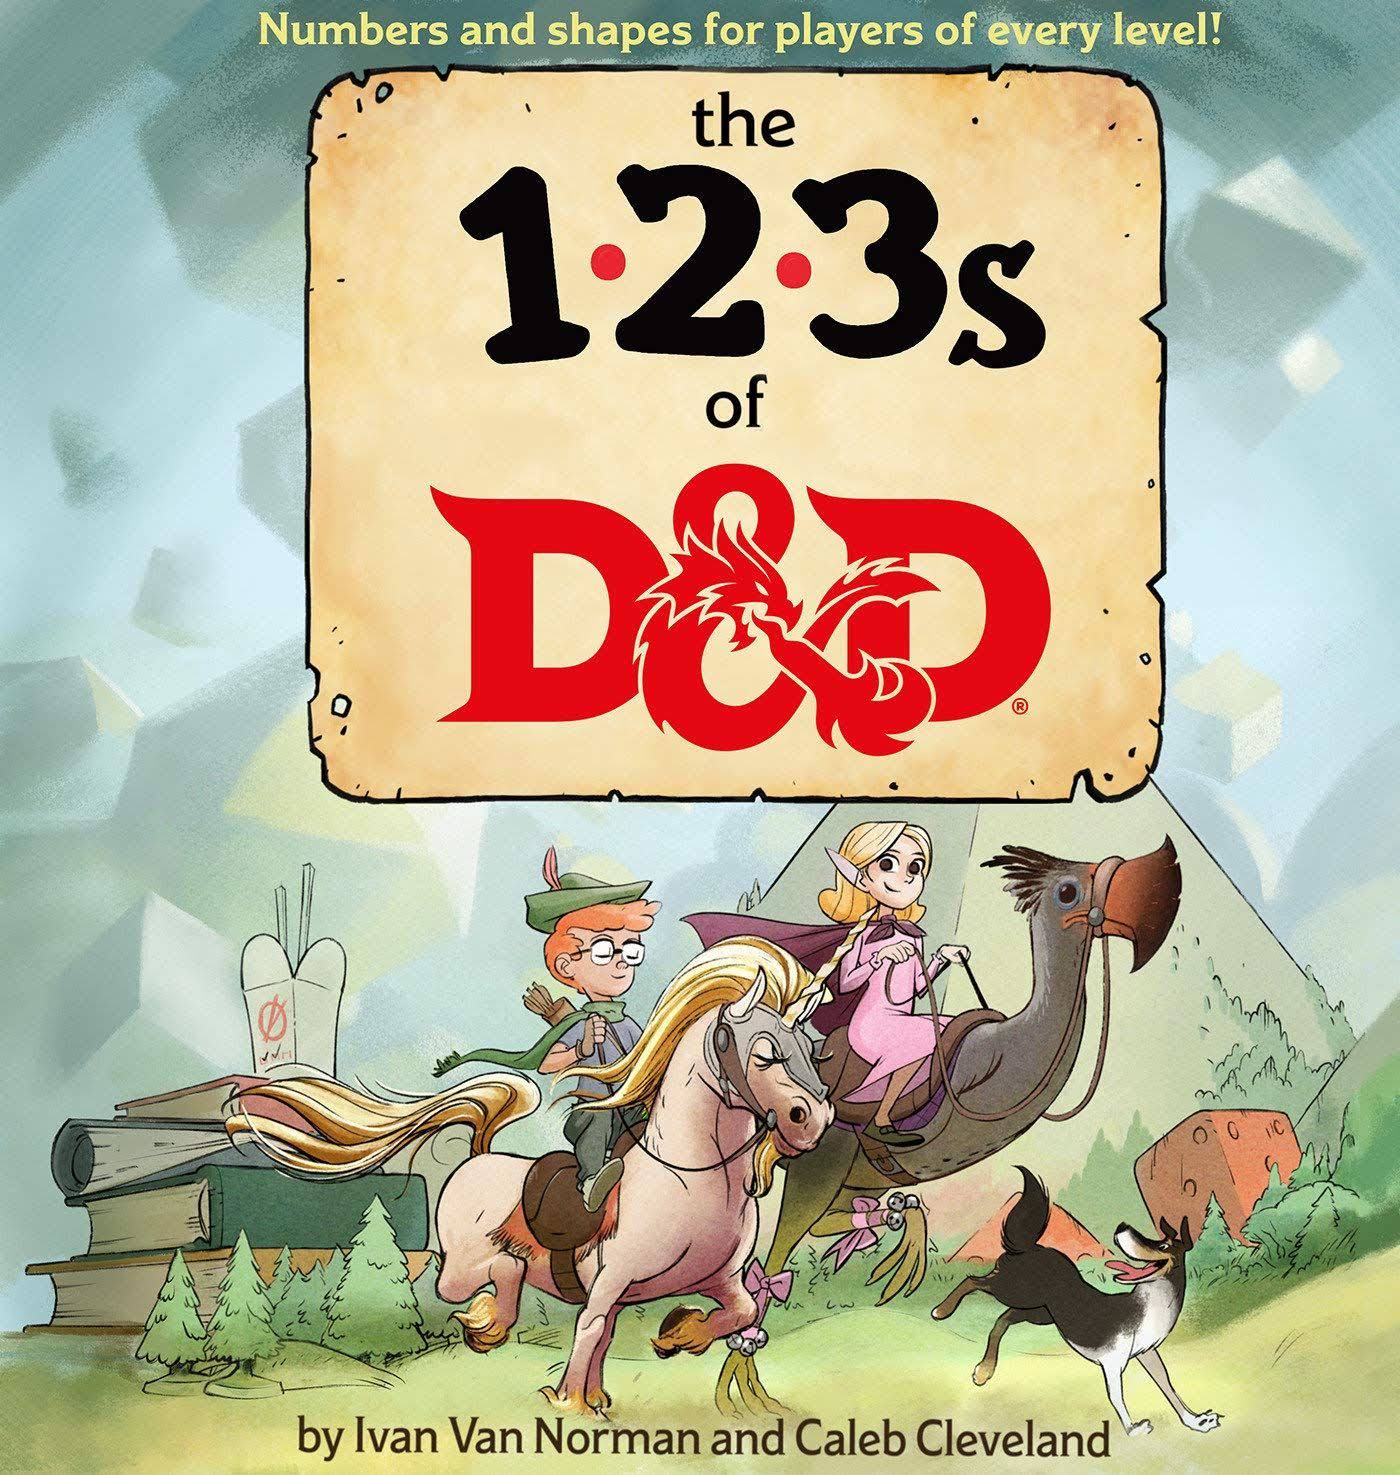 The 123's of D&d [Book]